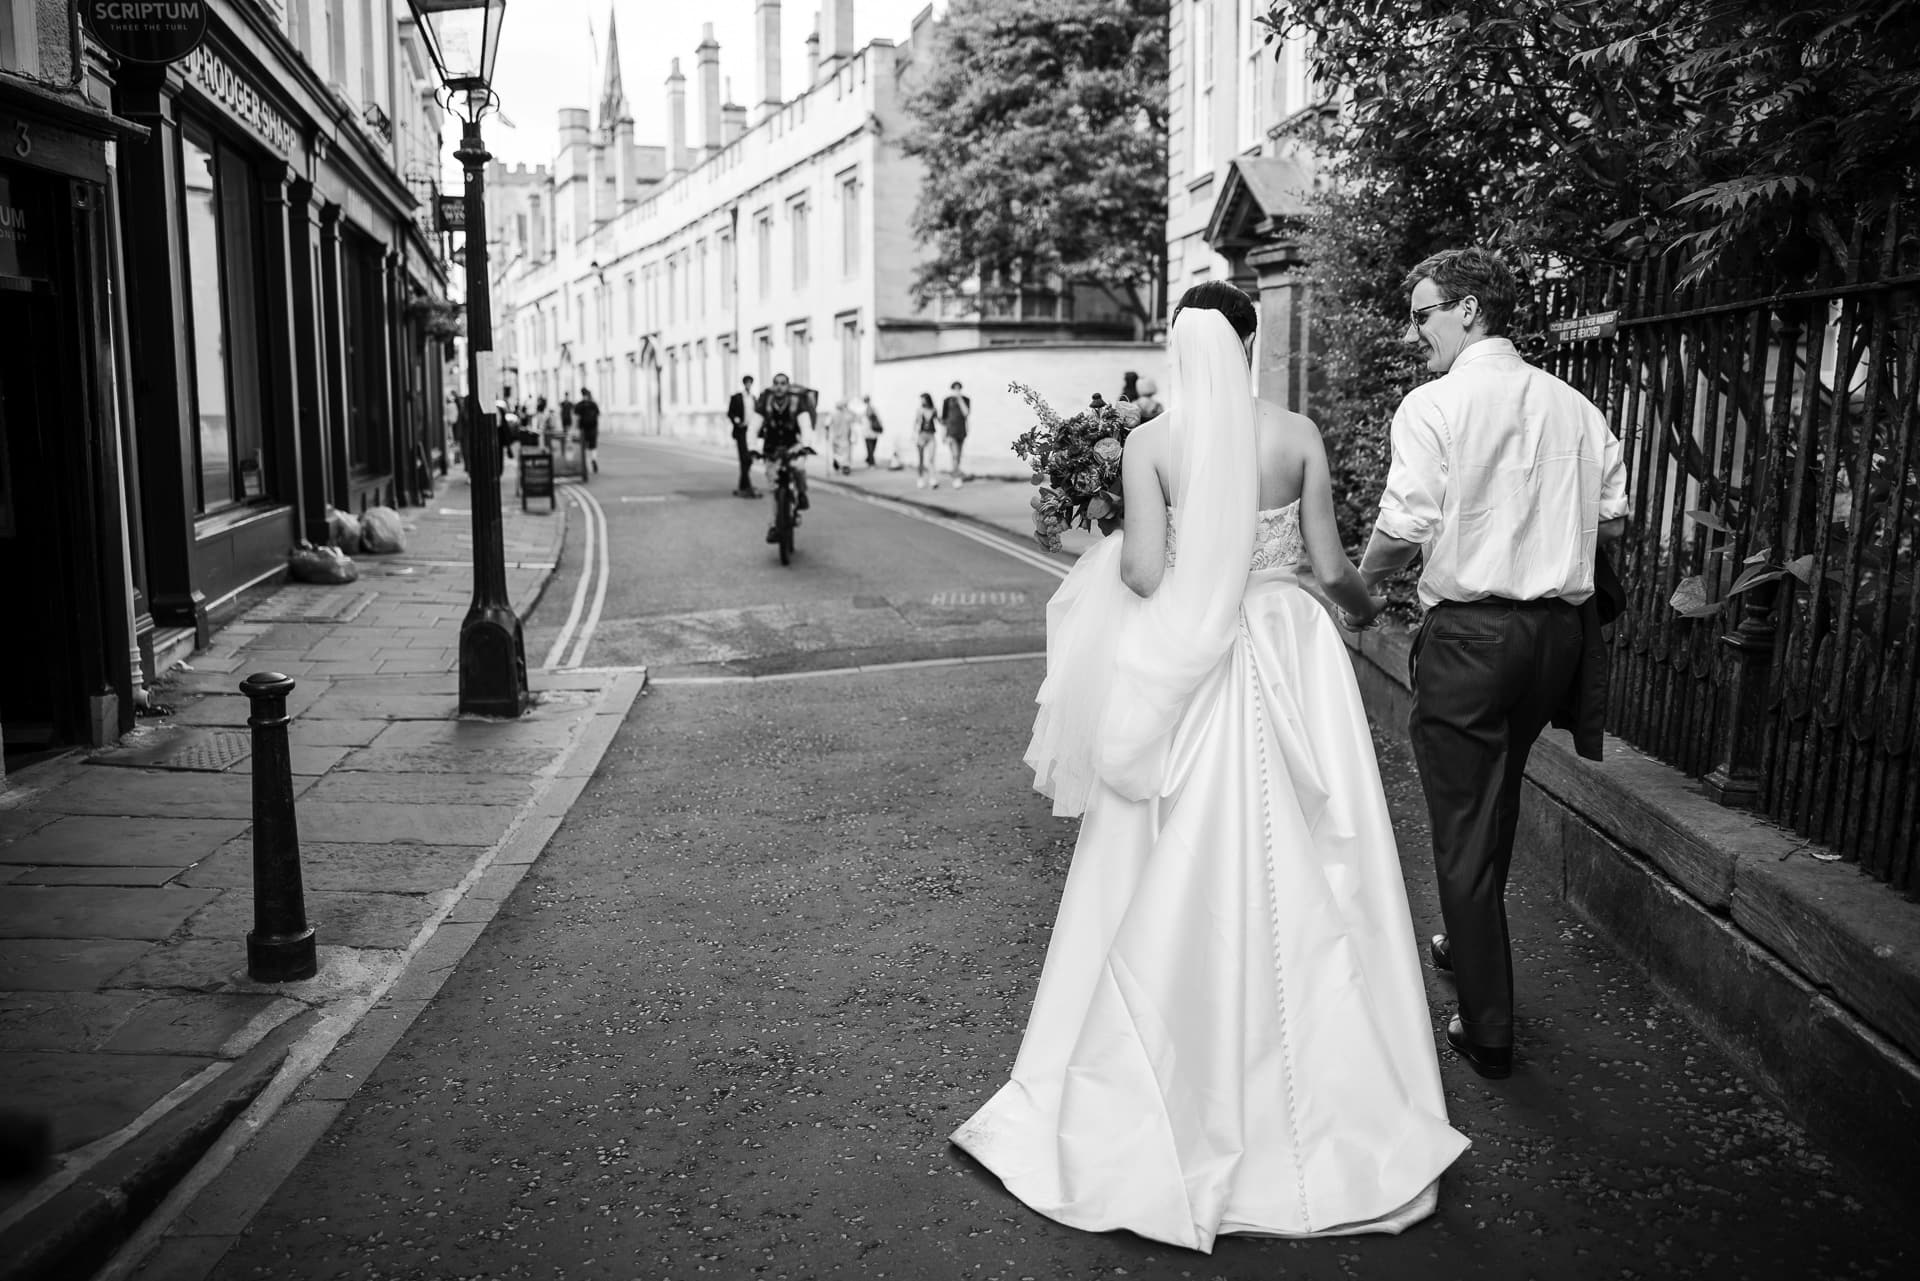 A view from behind of the bride and groom as they walk down the street in Oxford